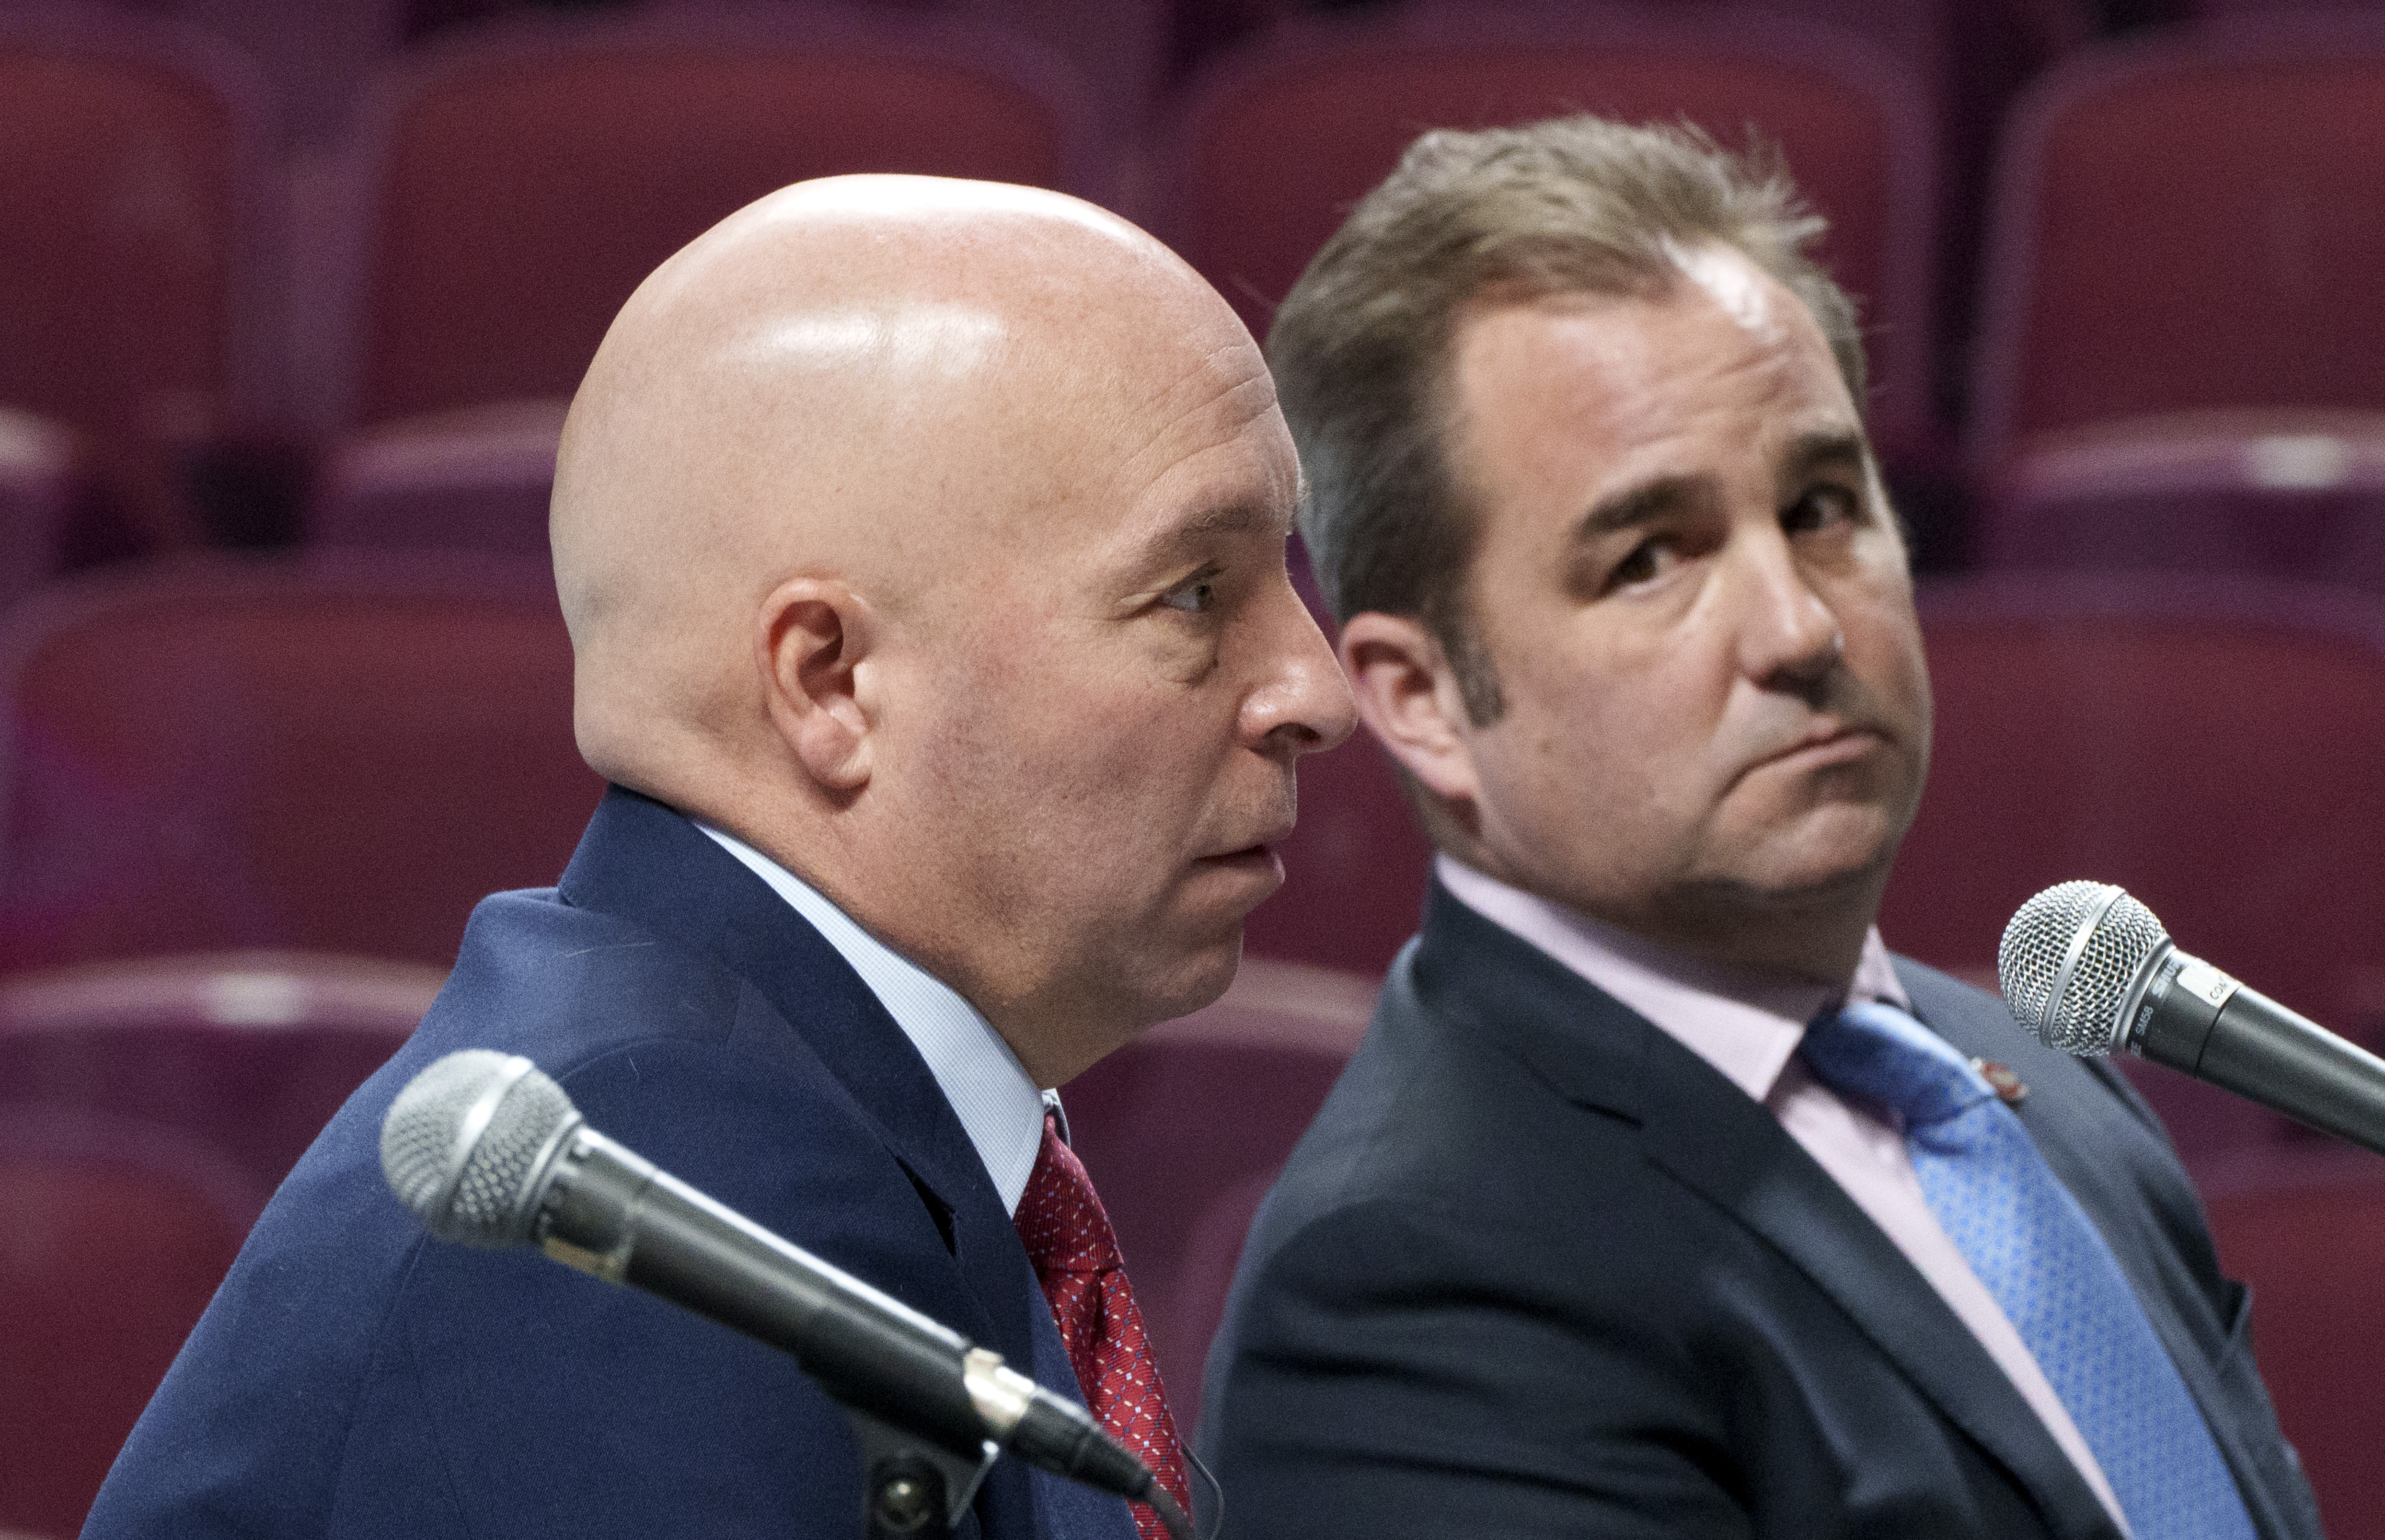 NHL player agent Kent Hughes hired as new GM of Canadiens